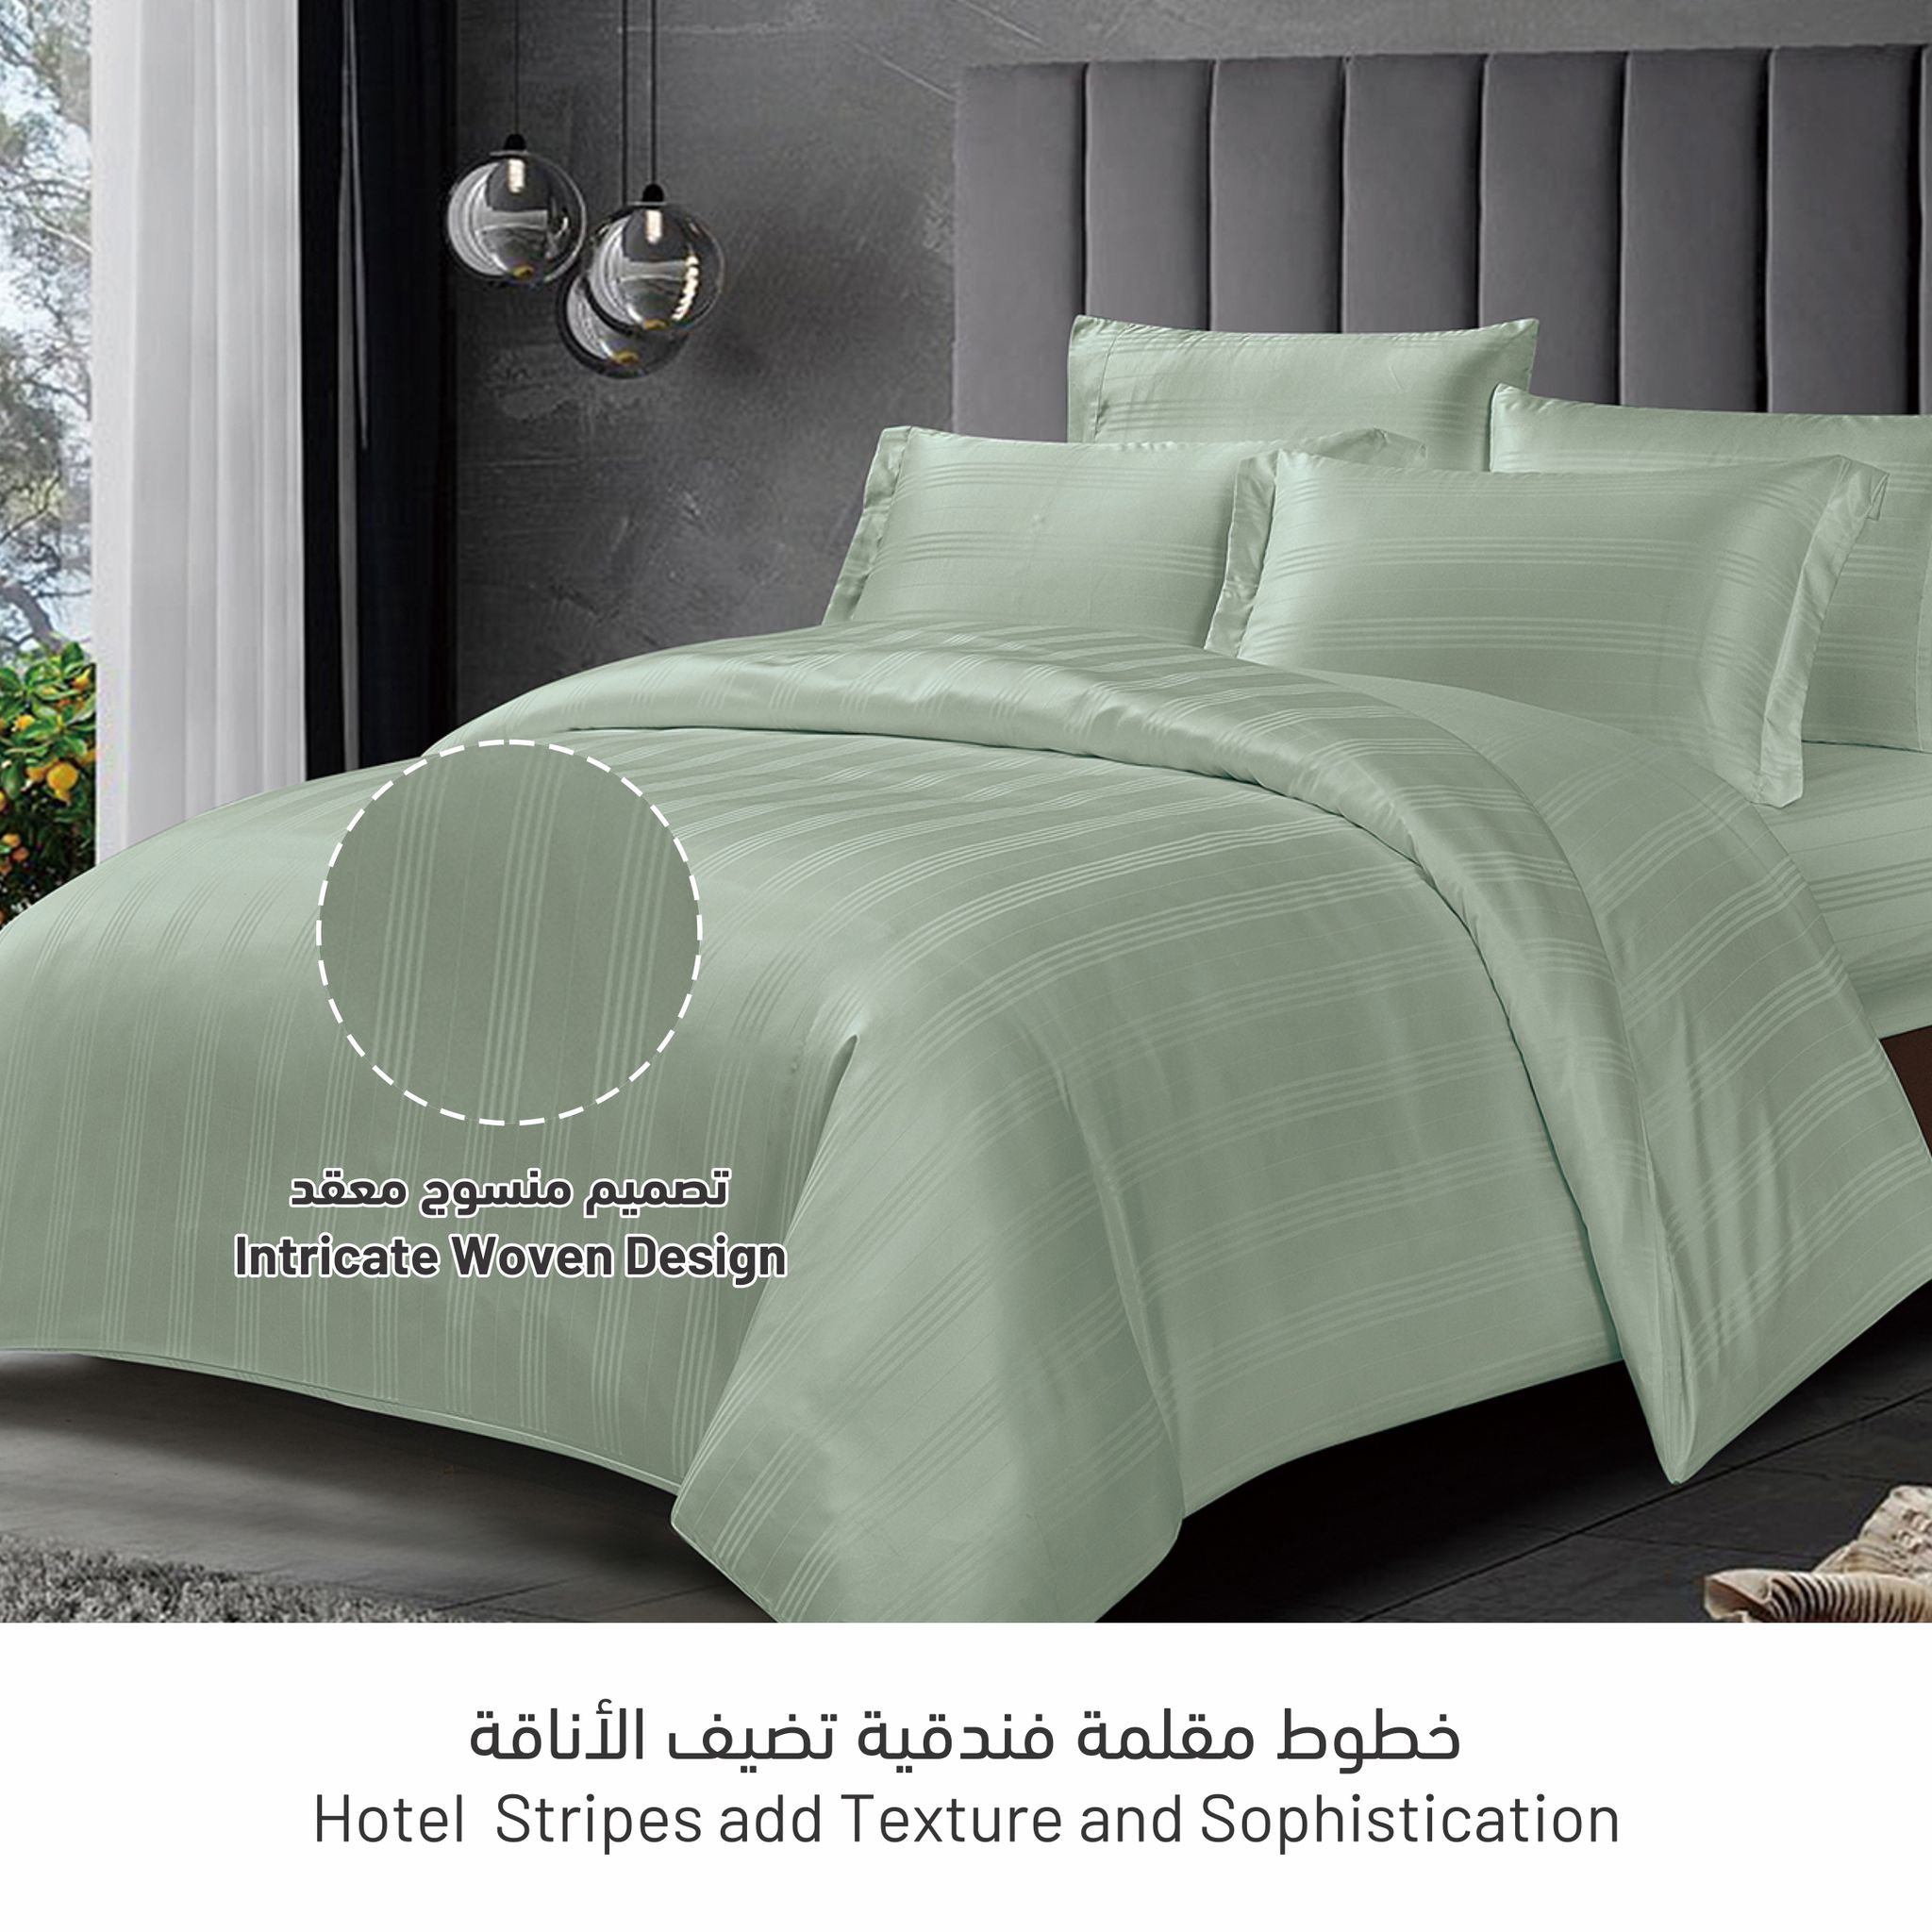 7-Piece King Size Italian Jacquard Luxurious Hotel Style Comforter, Verigated Stripes with Removable Filler, Sage Colour